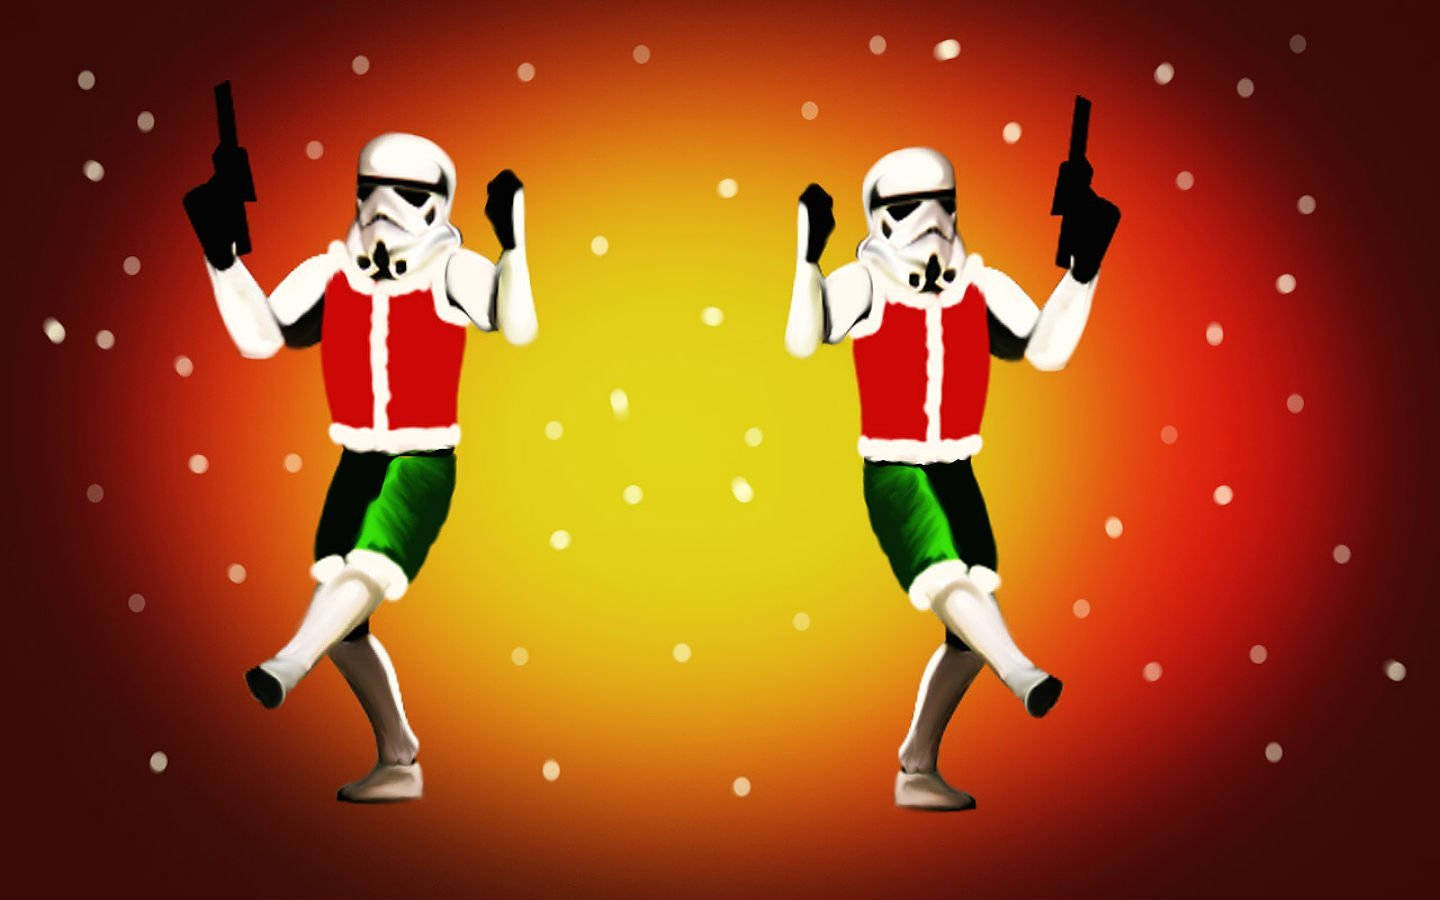 Plug In The Holiday Cheer By Celebrating Christmas With The Characters From Star Wars! Background